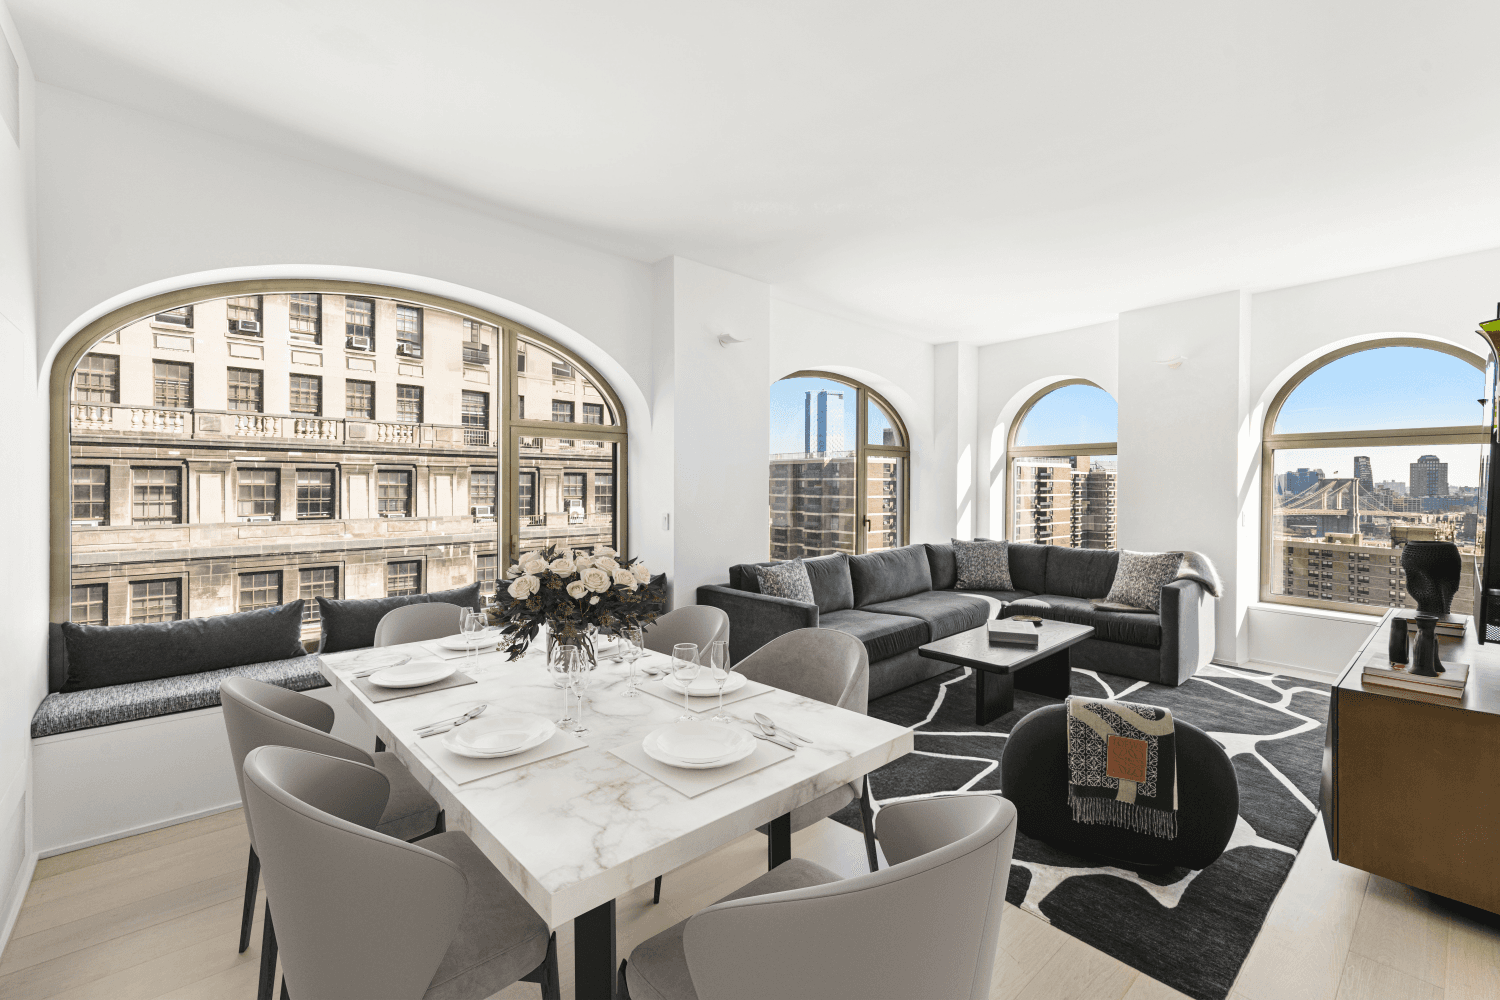 TIME100 Designer Condo in Prime Fulton SeaportGraced with hand selected designer finishes and sweeping views of the East River and city skyline, this stunning Sir David Adjaye corner condo oozes ...